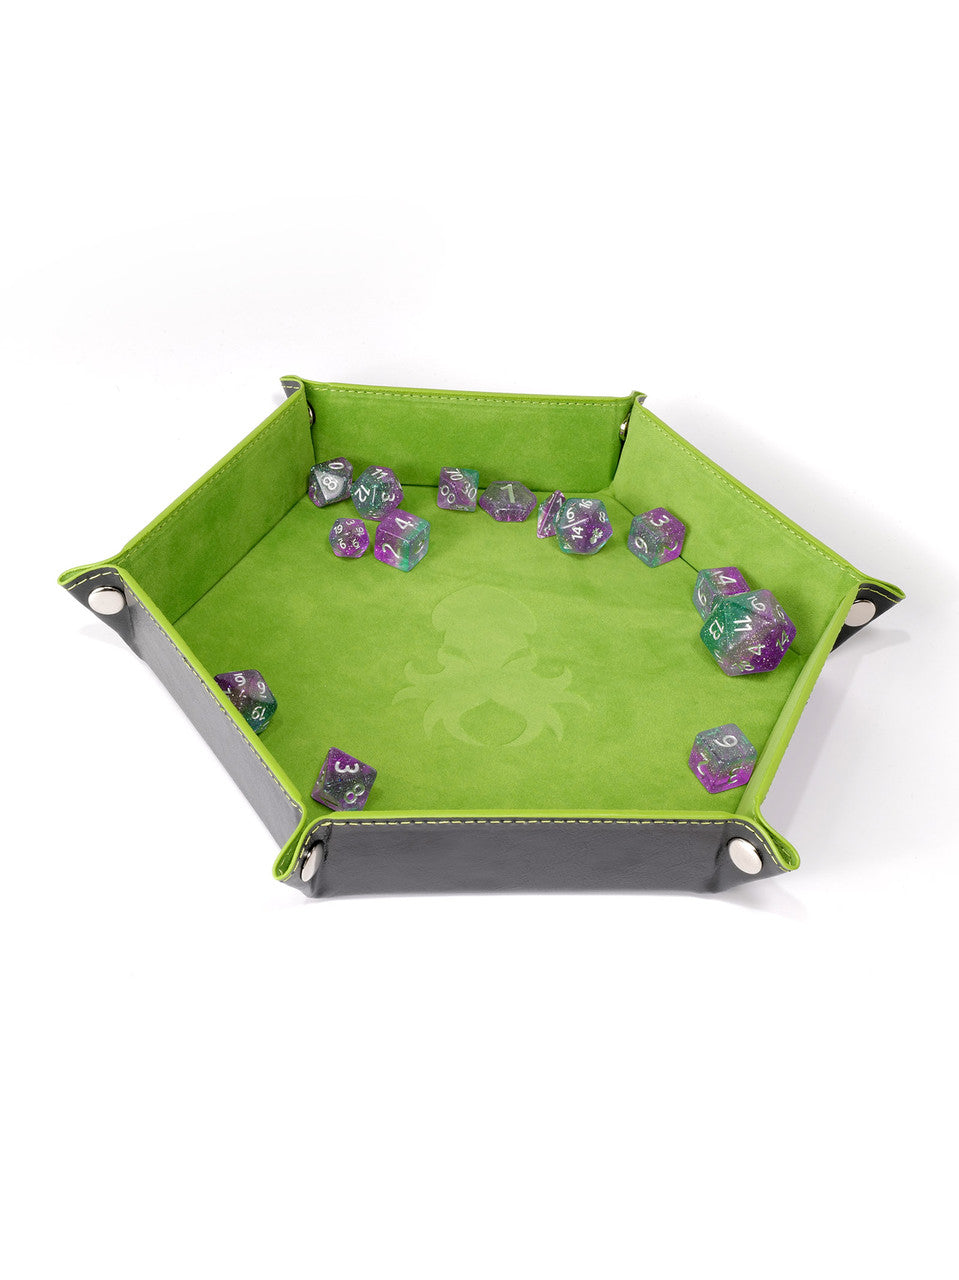 Collapsible Kraken Dice Tray Green and Black